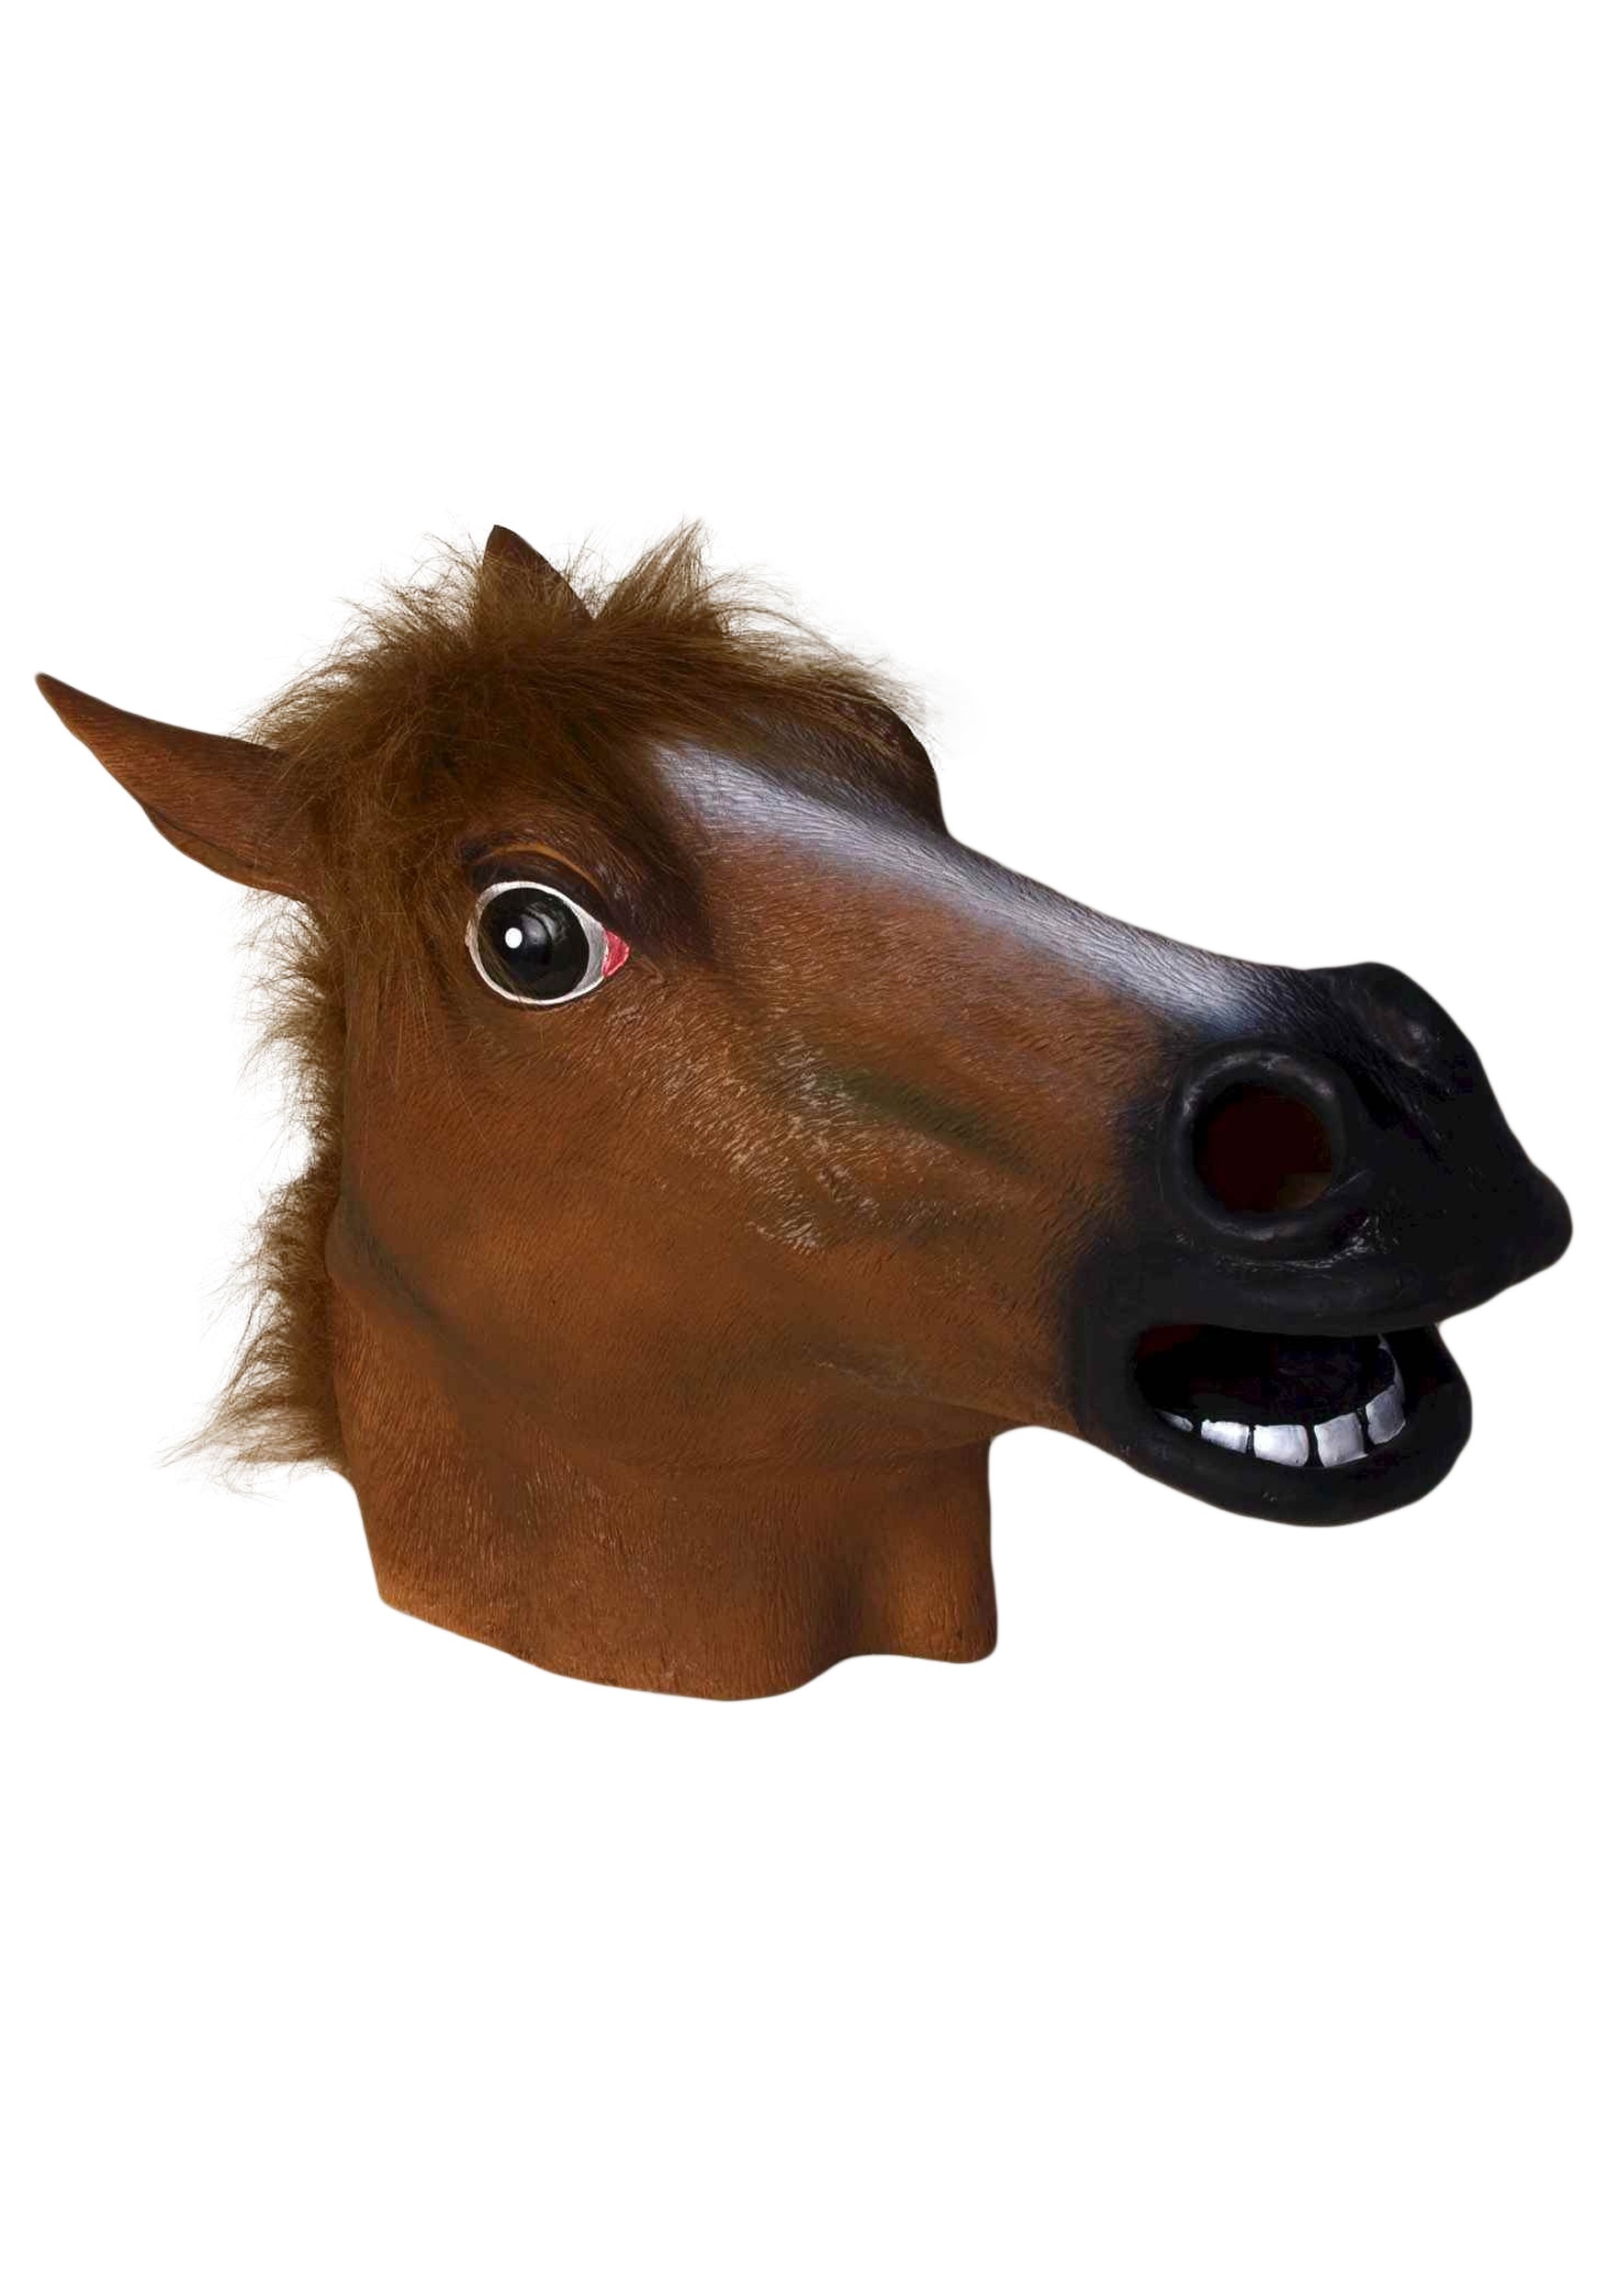 New Funny Latex Animal Adult Costume Horse Head Mask Fancy Dress Stag Hen UK 